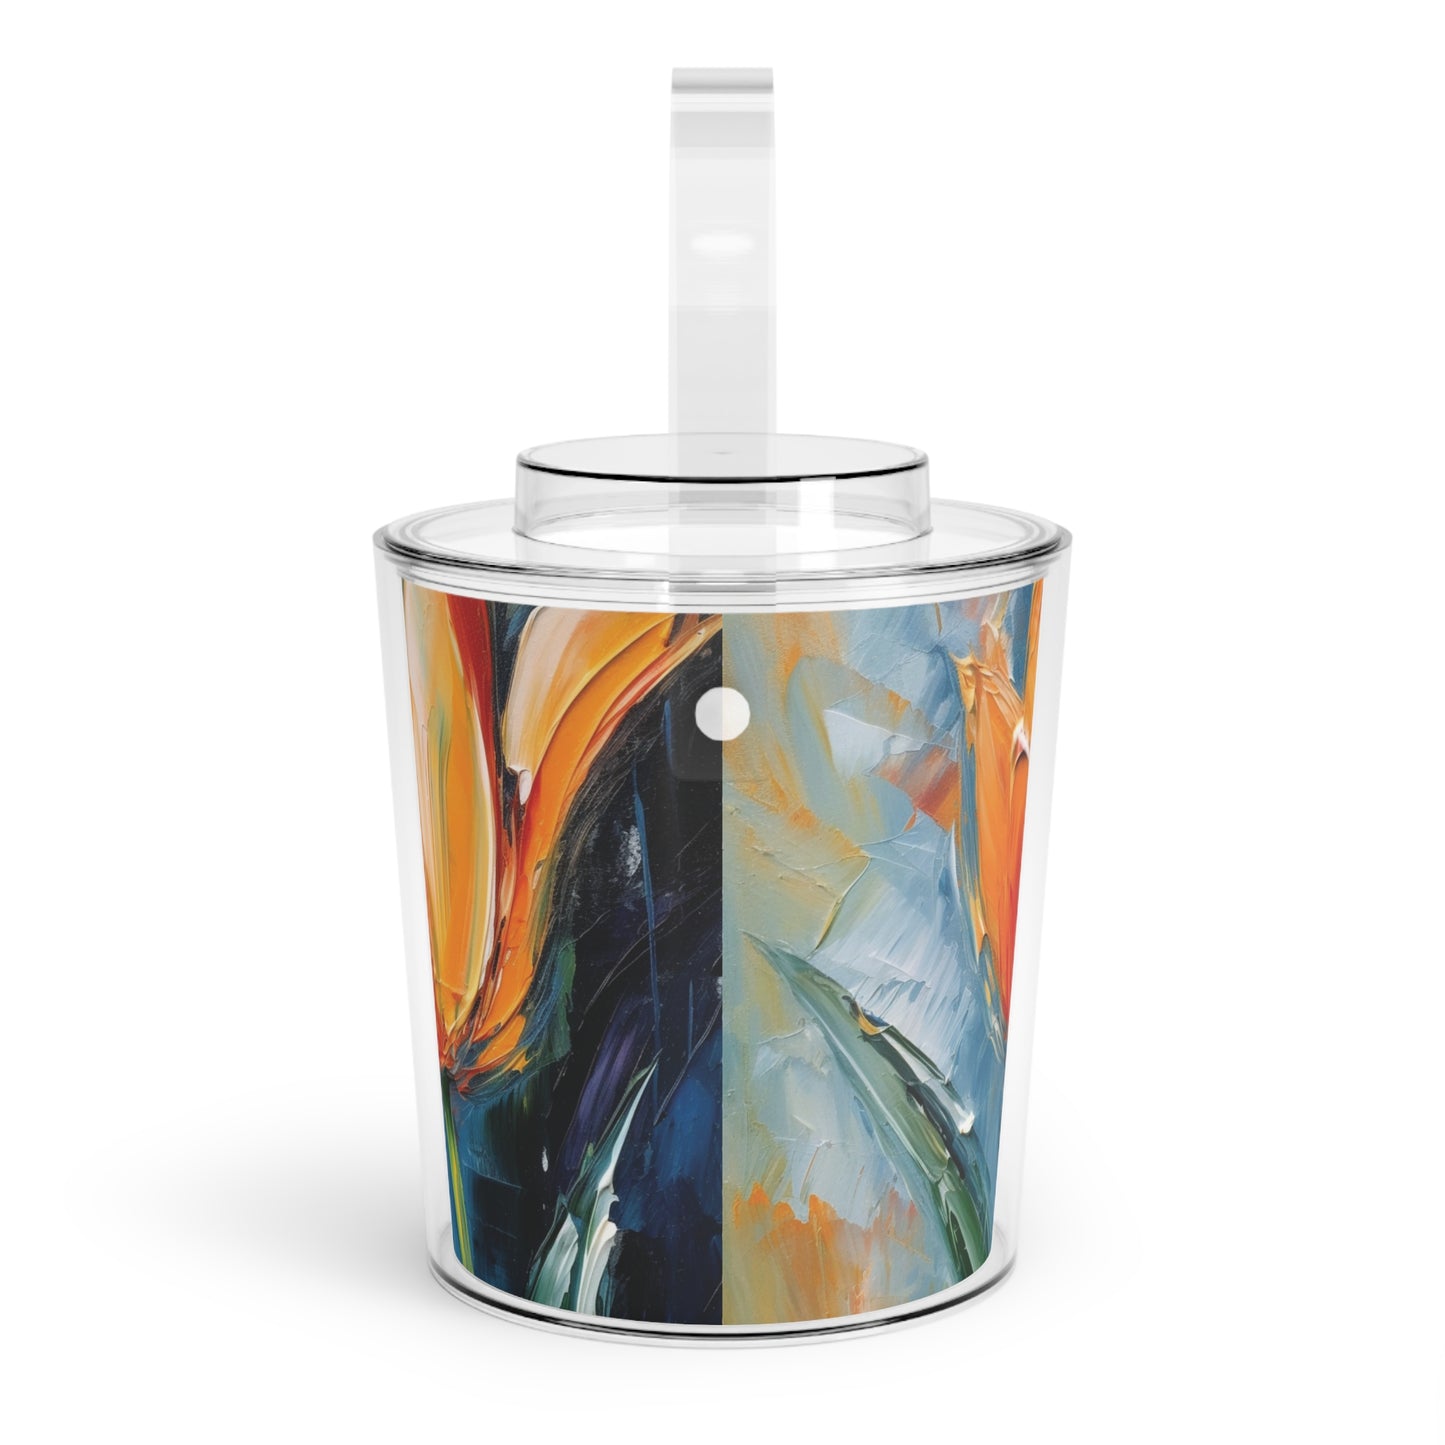 Orange Tulip Magic on Ice Bucket with Tongs: A Blossoming Artistic Delight